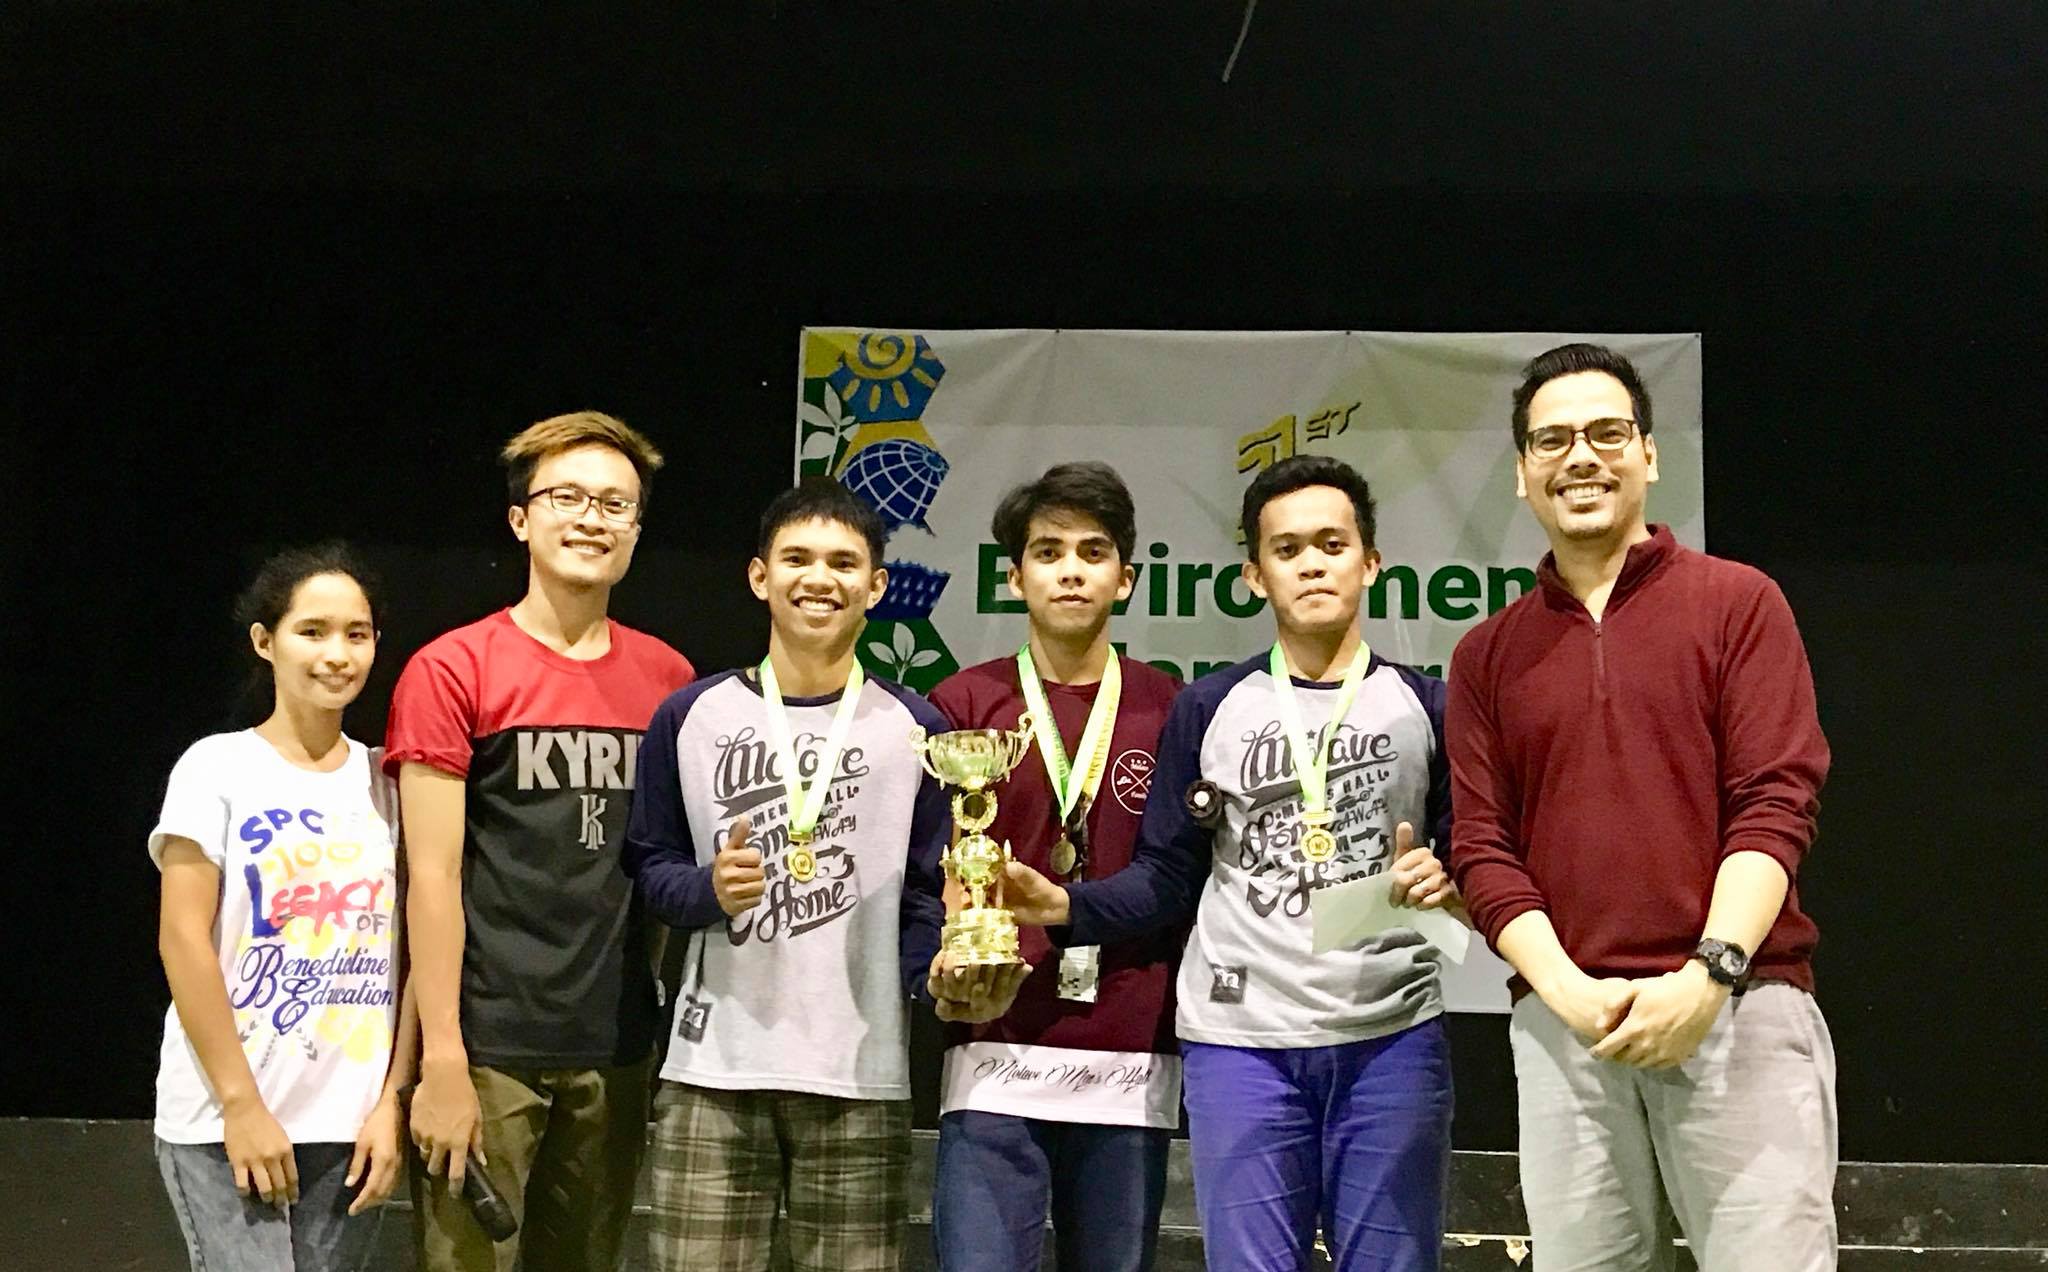 CHAMPS. UISB winners' Angelo Astudillo, Ayron Garrido and Ruel Lamberte poses with quiz show master Derek Alviola (right corner) and UISB Pres. Junrey Goles (2nd from the left) after receiving their prize.